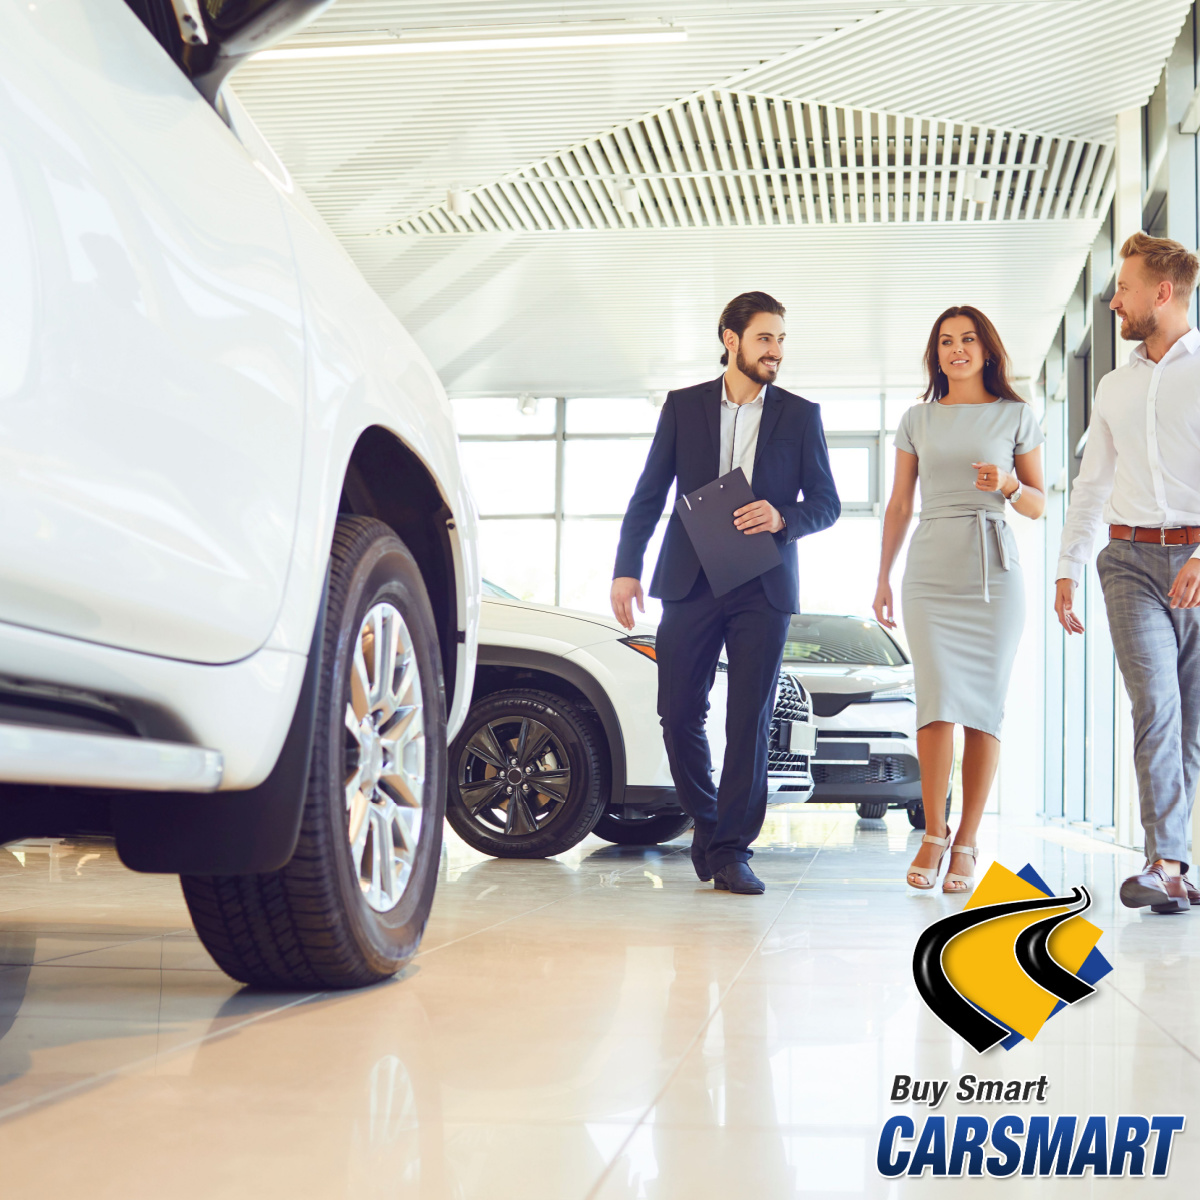 Find the Best Prices for Arlington Drivers at Our Car Dealership